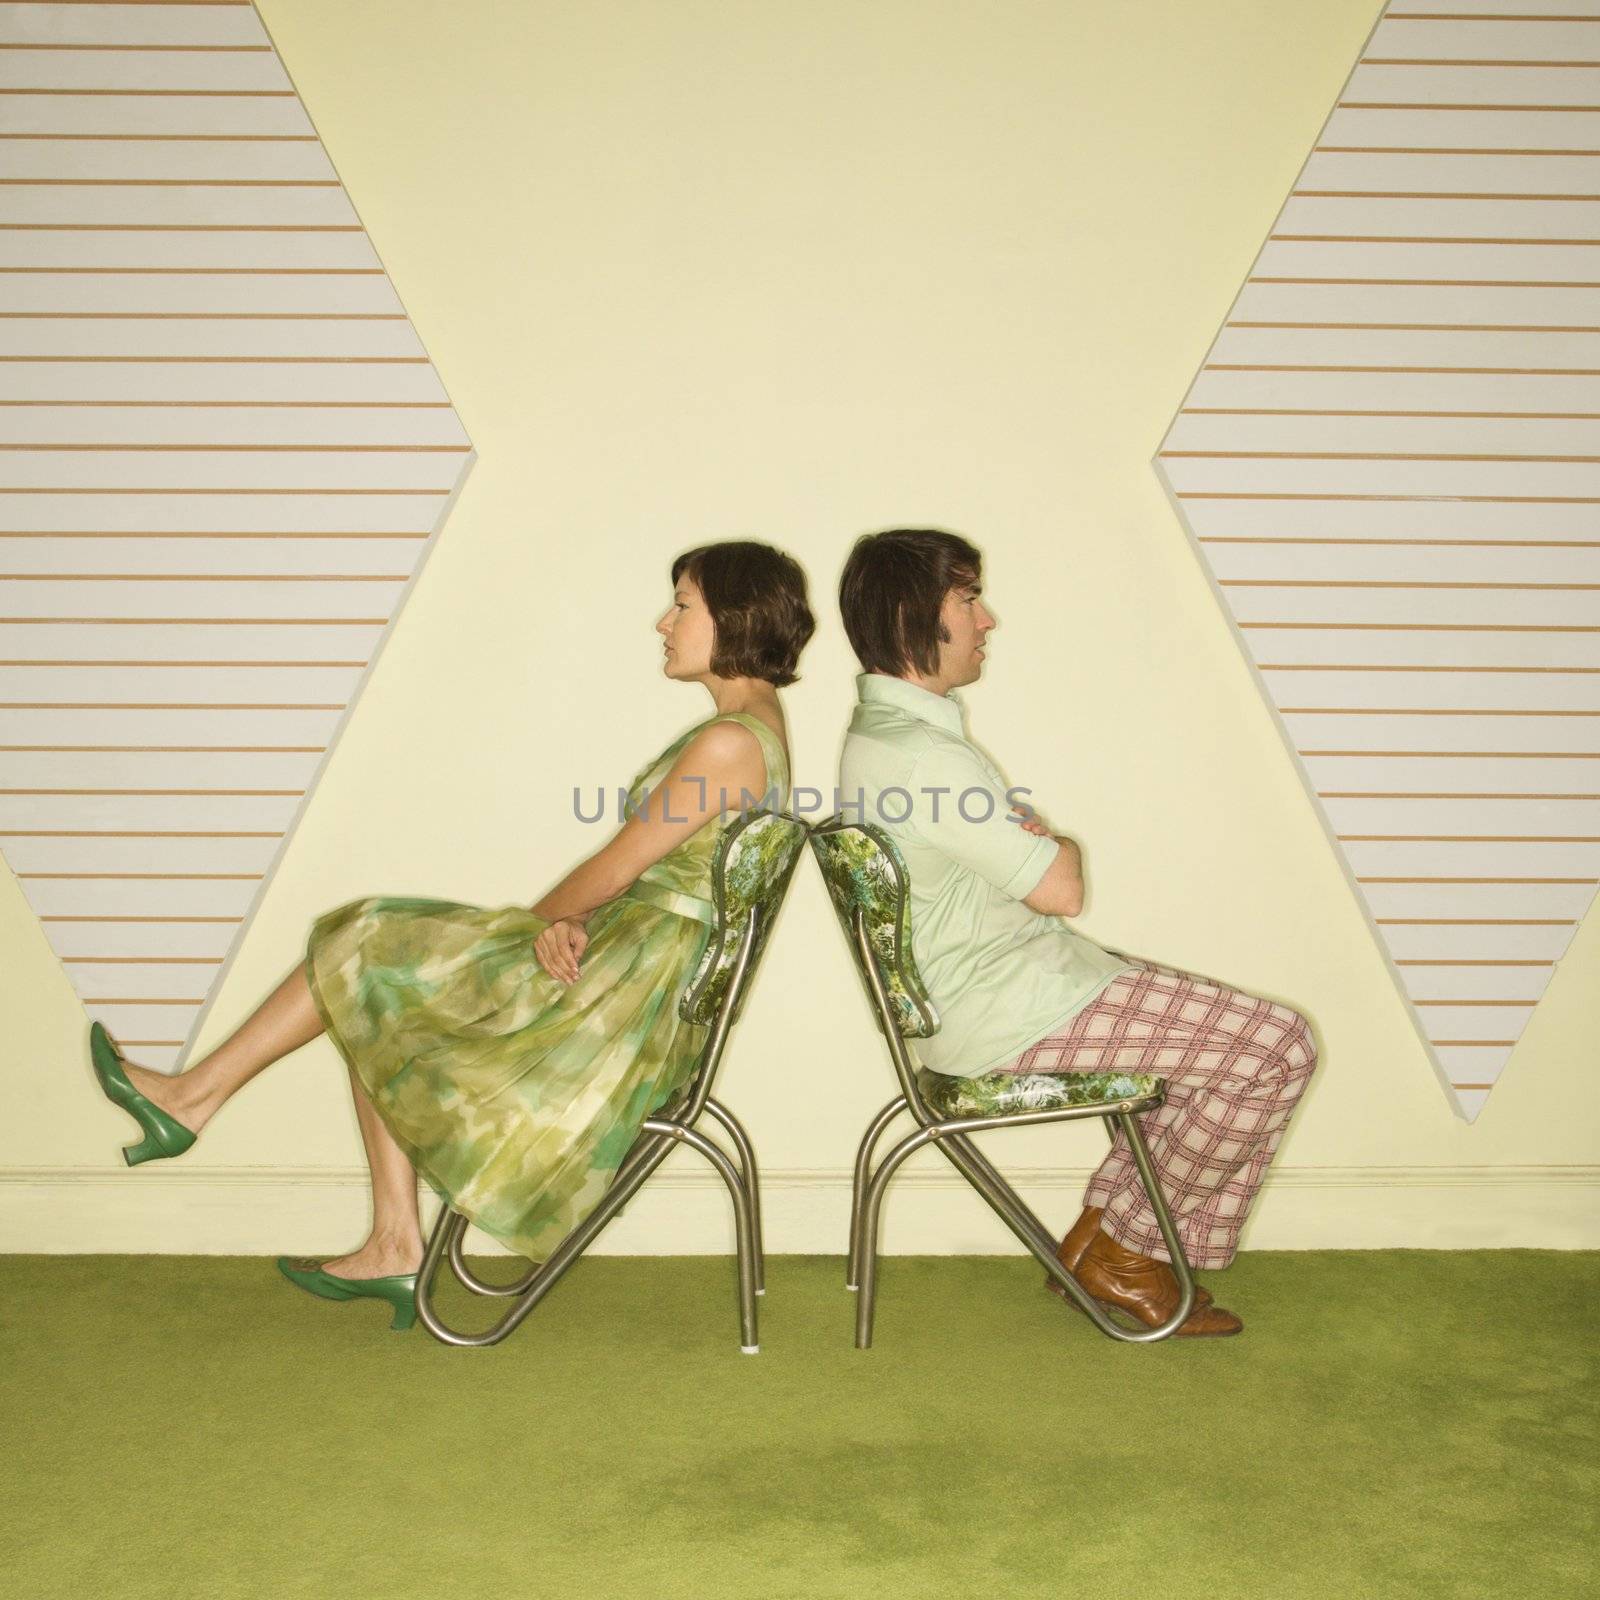 Caucasian mid-adult couple wearing vintage clothing sitting back to back in green vinyl chairs with arms crossed.